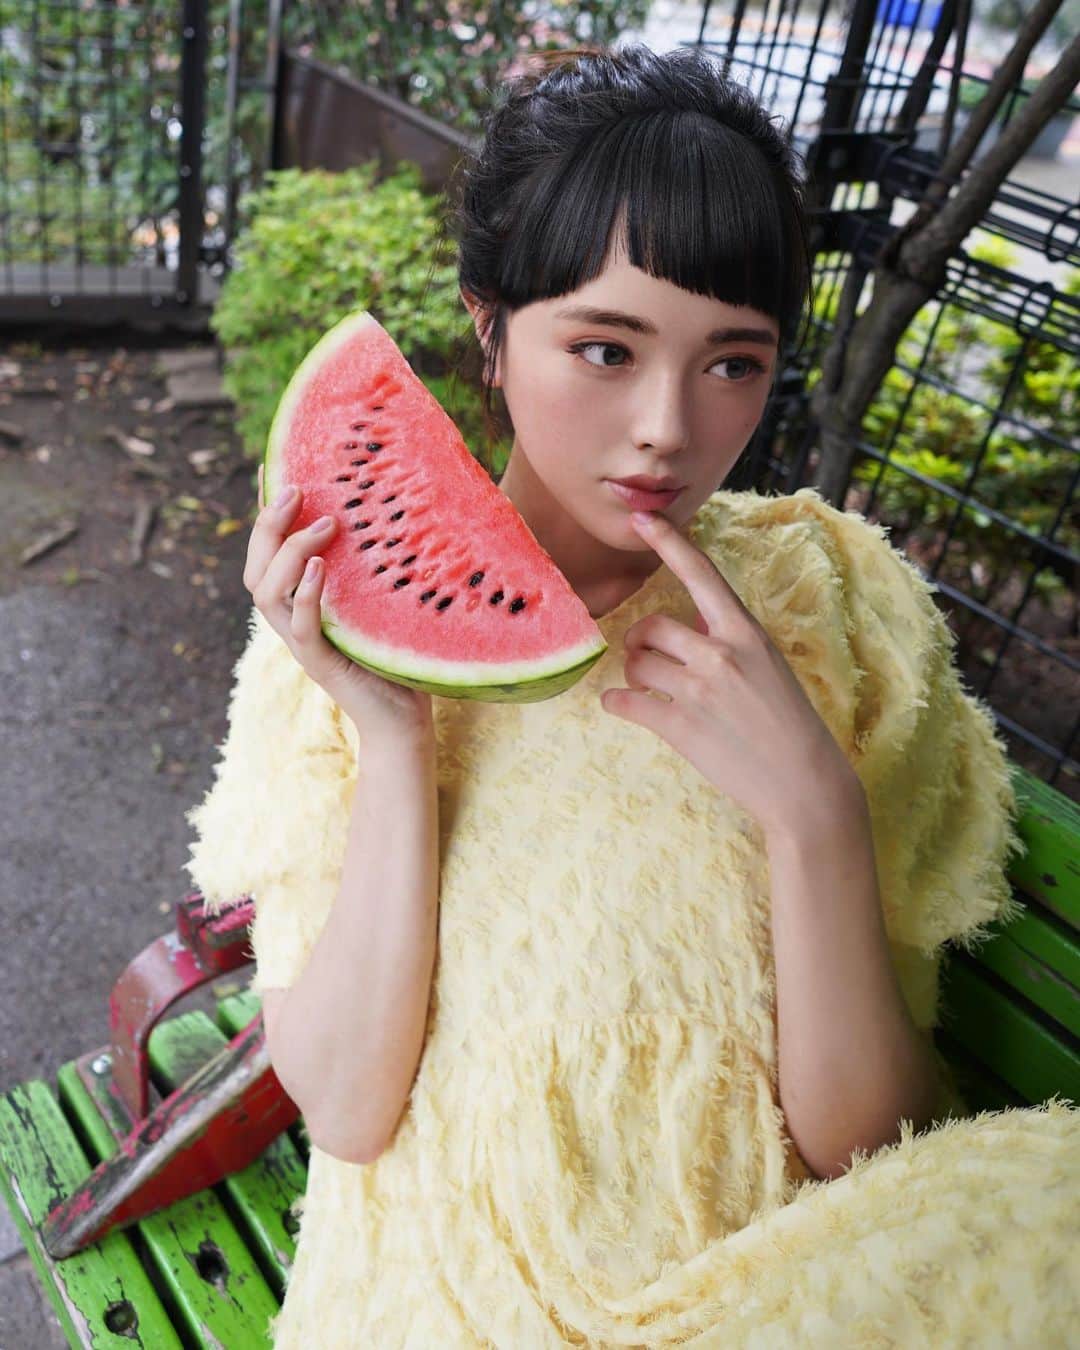 RIA（リア）さんのインスタグラム写真 - (RIA（リア）Instagram)「🍉🍌🥝🍒🍑🐰🍉🍌🥝🍒🍑﻿ The town you want to live in depends on the lifestyle you want to live.🏕﻿ What are the conditions of the city you want to live in👀¿﻿ ﻿ 送りたいライフスタイルによって﻿ 住みたい街は変わる.﻿ あなたにとって暮らしたい街の条件は🏕¿﻿ ﻿ 私は公園近くノ街で暮らすのが好き❤︎﻿ 緑に囲まれてランチだって﻿ ゆっくり読書だって﻿ 遊んでる子供の無邪気な笑顔に﻿ いつも癒されてる🌈﻿ ﻿ #Rialife#幸せホルモン#ライフスタイル#ワンピースコーデ#ワンカラーコーデ#黄色#公園#夏味#スイカ#fashion#lifestyle#happiness#hormone#peace#happinesseverywhere#nowyouknow#whatsoutthere#instagood#chance#betterword#neverever#oneworld#loveislove 🎈🐰﻿」7月25日 13時18分 - ria_ria_tokyo